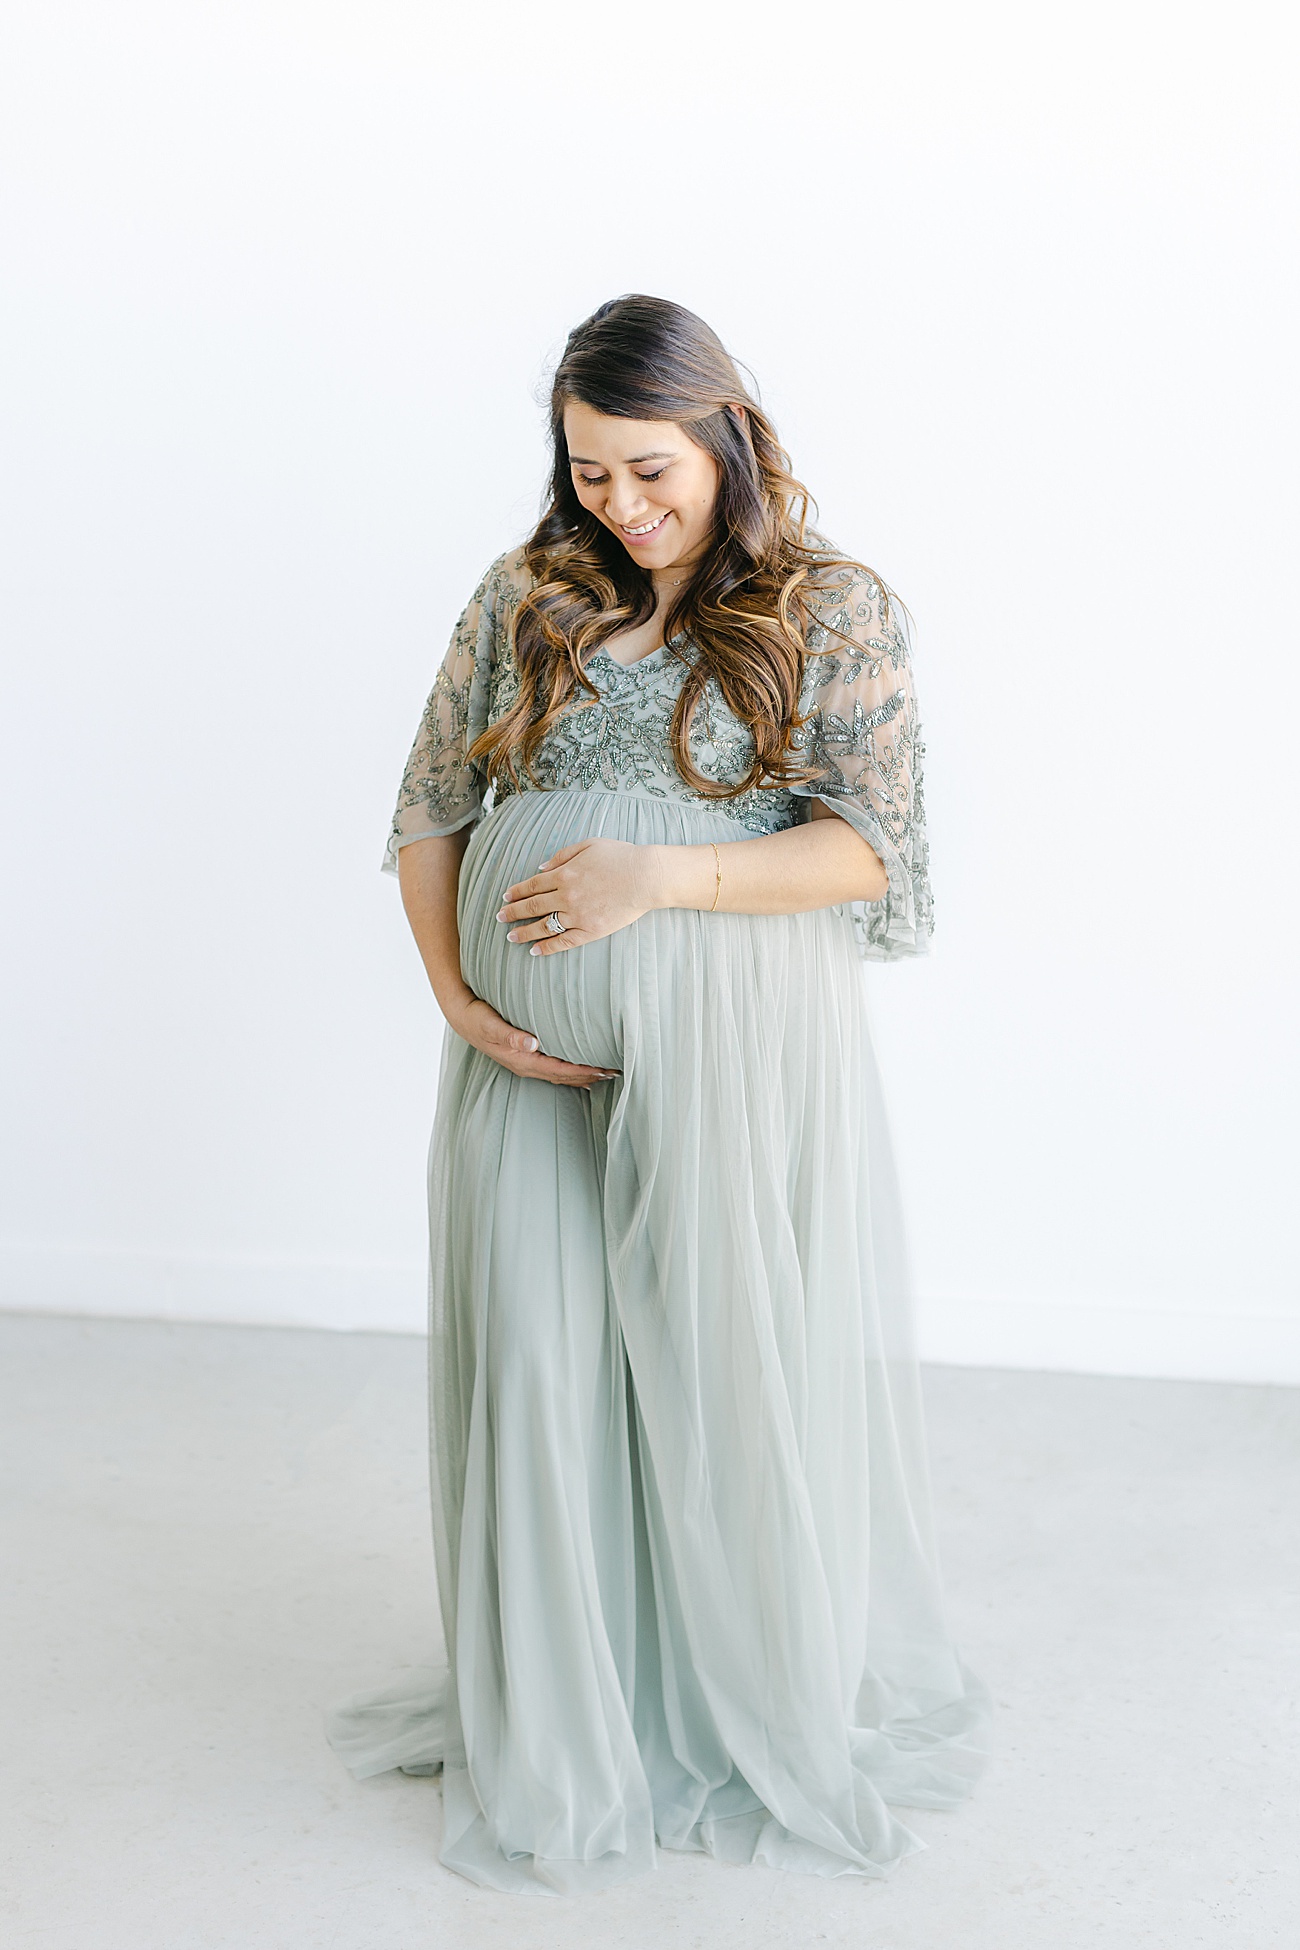 Stunning Mama-to-be during her maternity session for first baby. Photo by Austin maternity photographer, Sana Ahmed Photography.